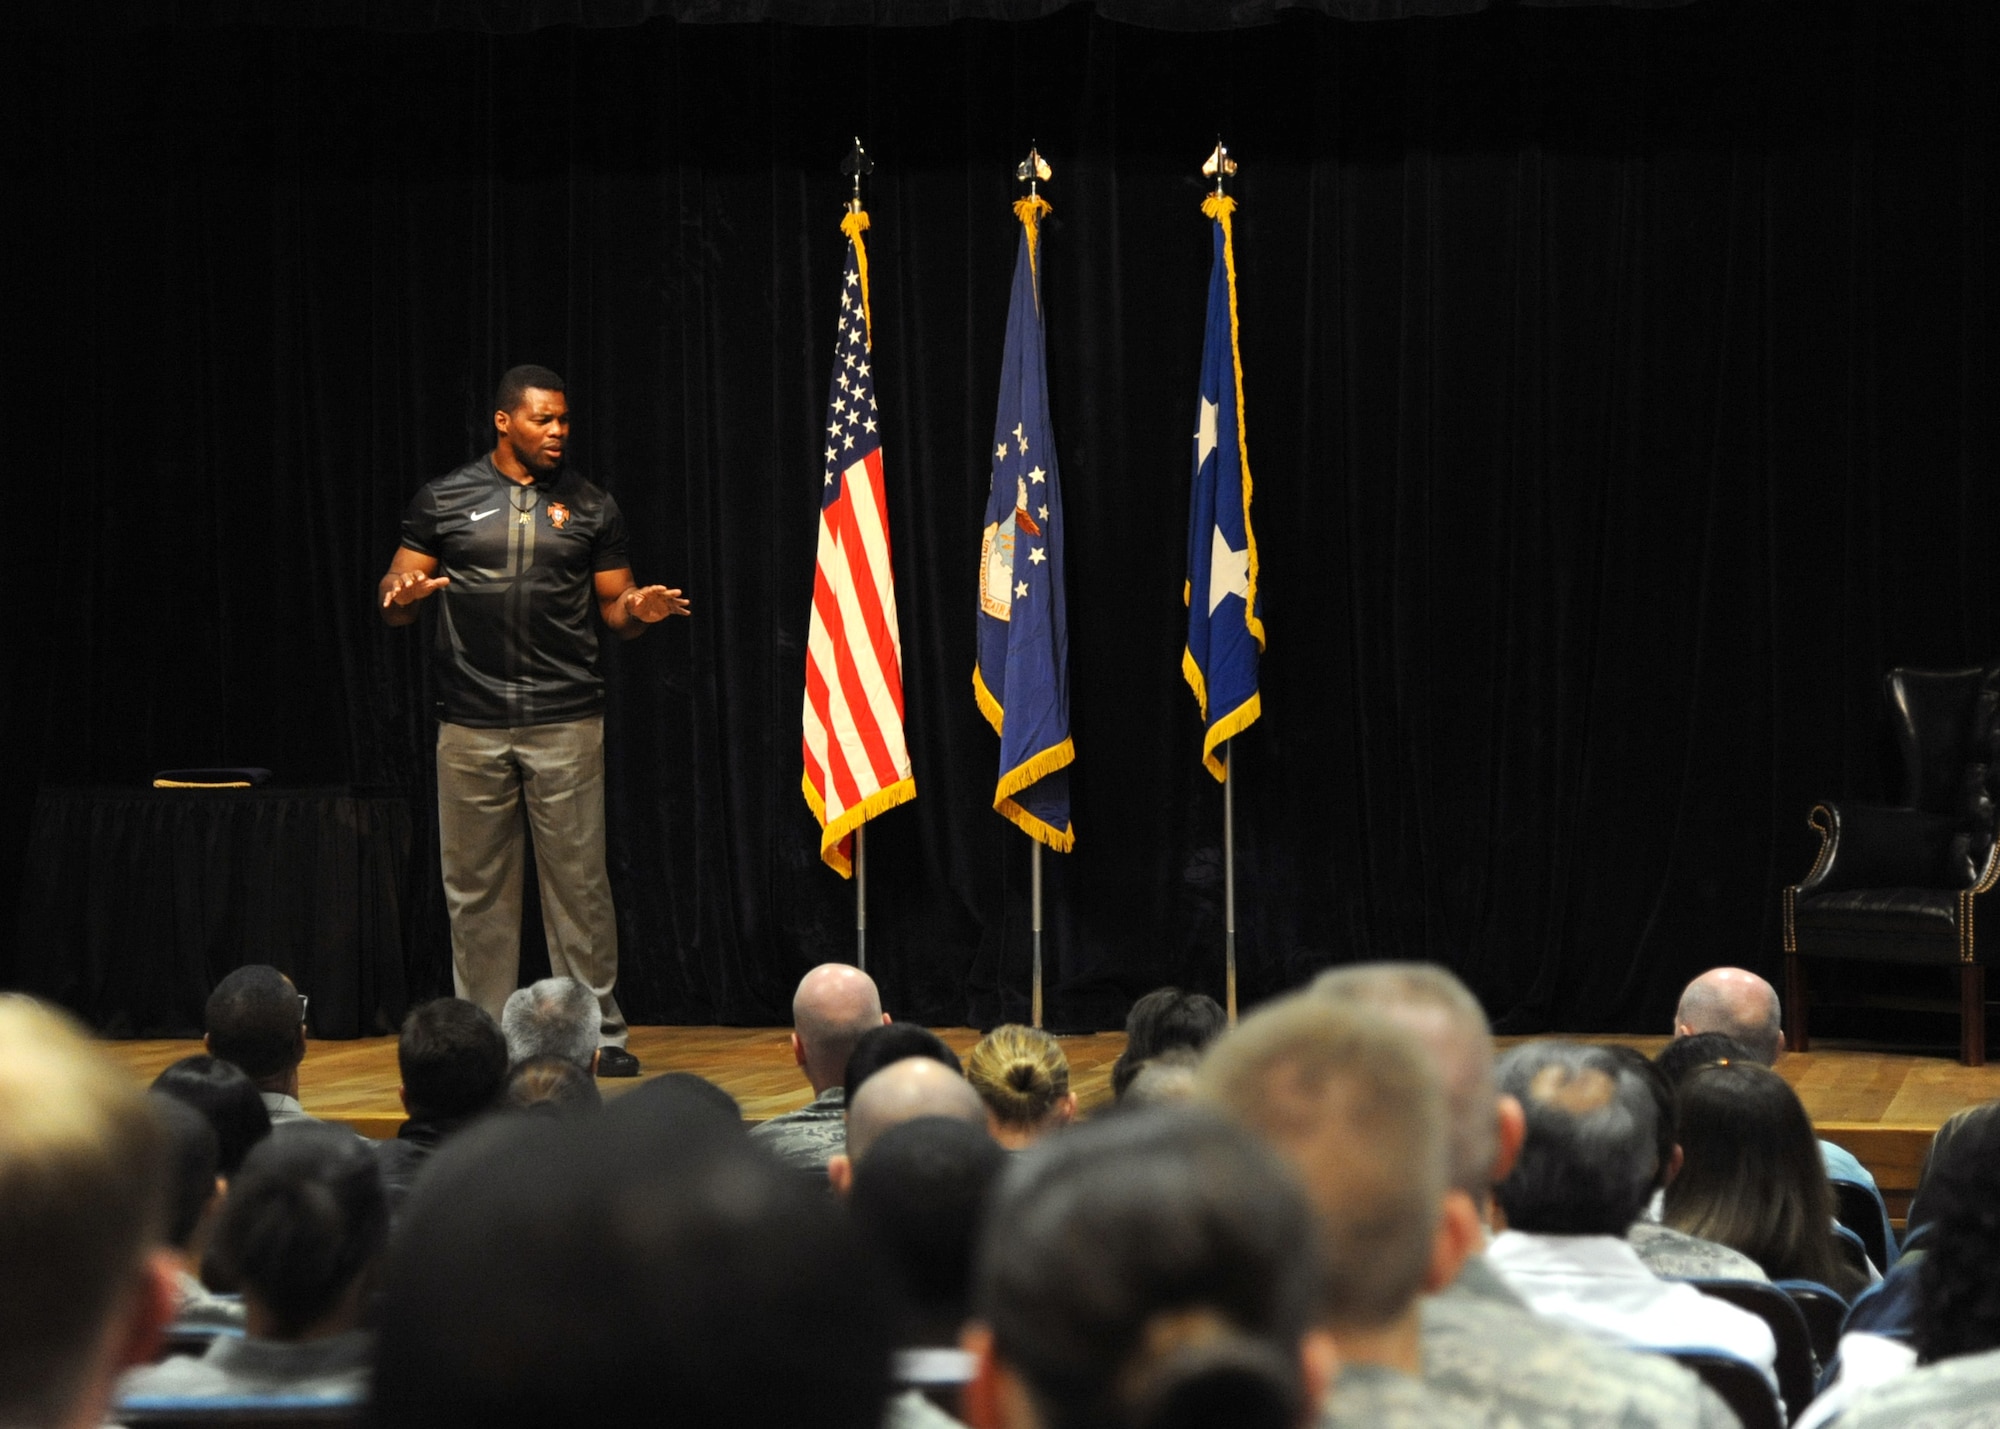 Herschel Walker speaks to more than 200 personnel from the 59th Medical Wing Oct. 23, 2013, at the Wilford Hall Ambulatory Surgical Center, Joint Base San Antonio-Lackland, Texas. As part of the Department of Defense Patriot Support Program’s Anti-stigma campaign, Walker visits military installations across the country to encourage service members to seek help for mental health and substance abuse issues. 